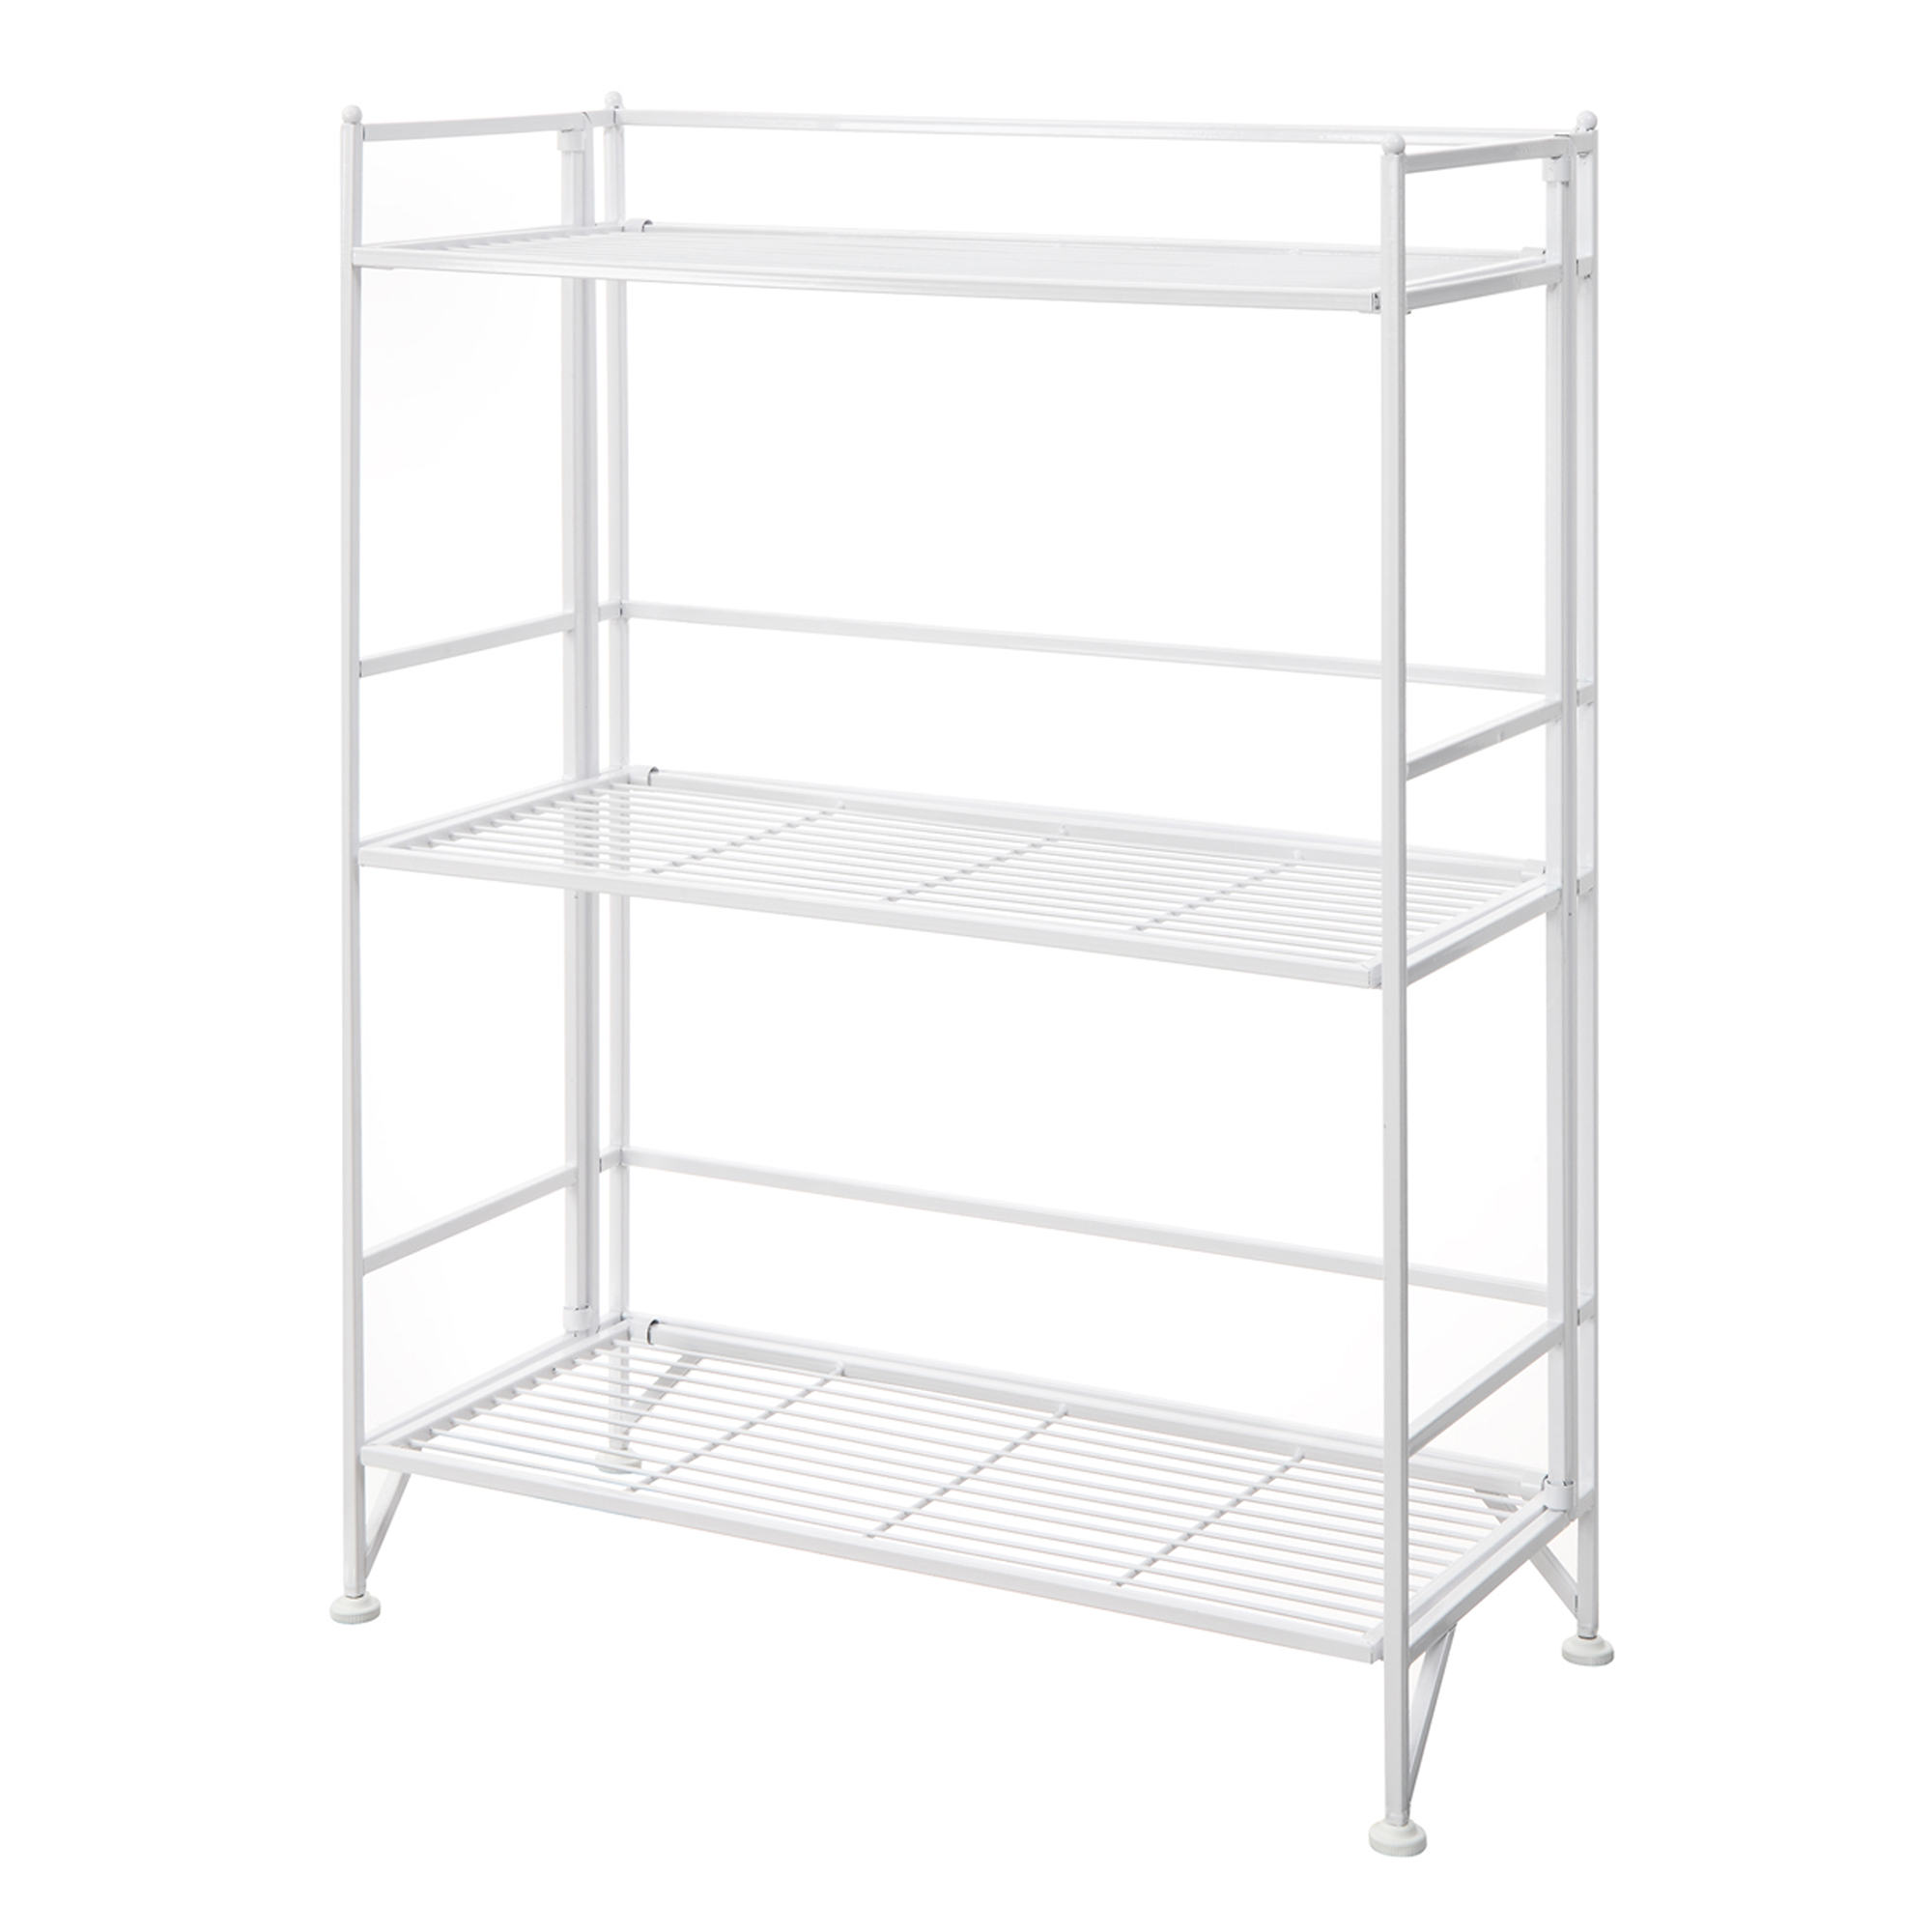 Convenience Concepts Xtra Storage 3 Tier Wide Folding Metal Shelf, White - image 3 of 7